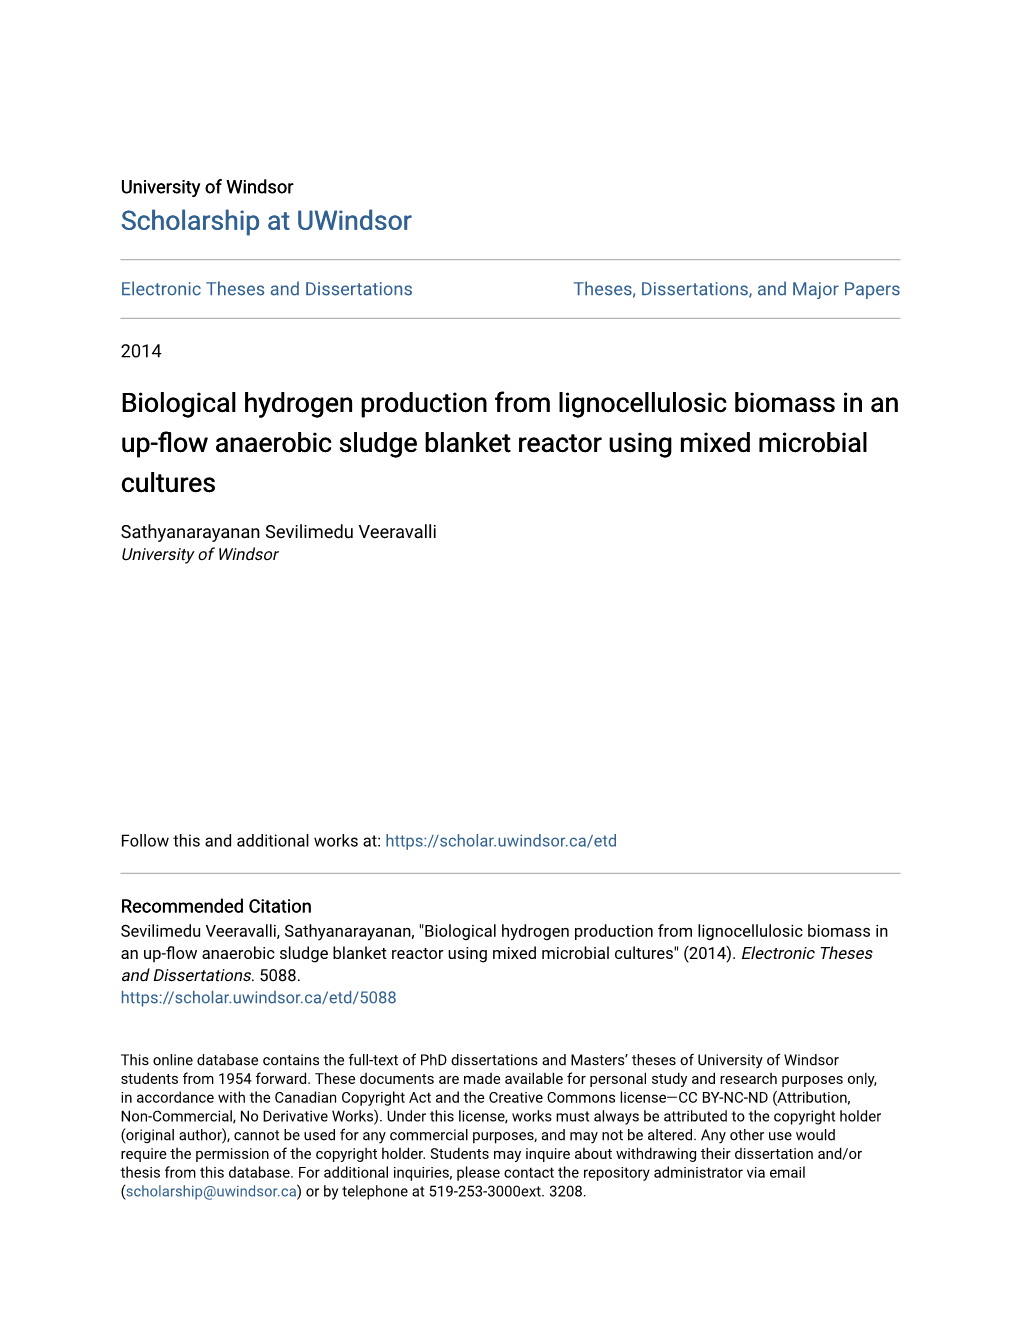 Biological Hydrogen Production from Lignocellulosic Biomass in an Up-Flow Anaerobic Sludge Blanket Reactor Using Mixed Microbial Cultures